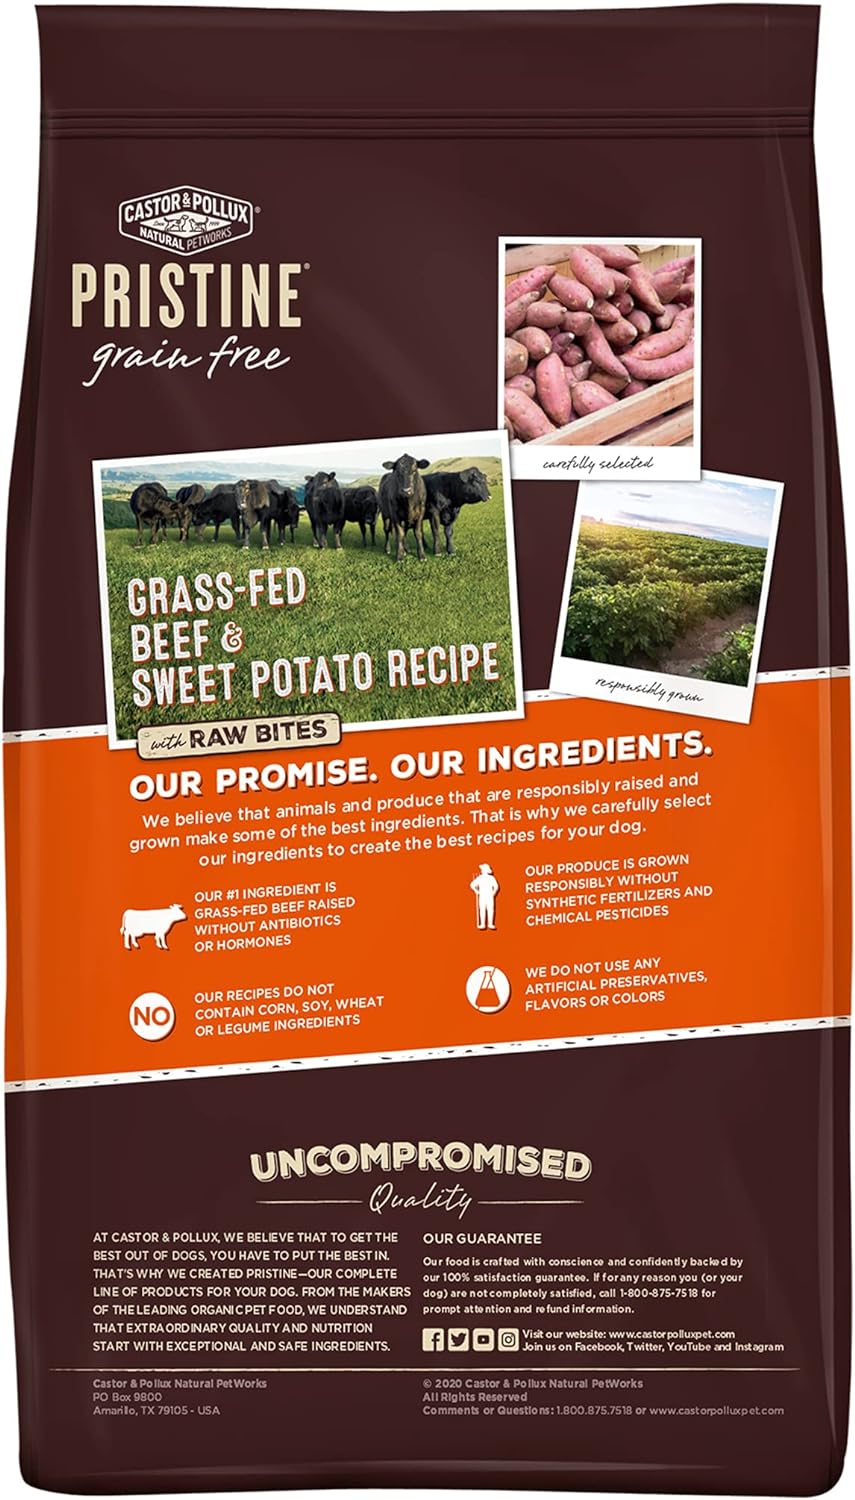 Castor & Pollux Pristine Grain-Free Grass-Fed Beef & Sweet Potato Recipe with Raw Bites Dry Dog Food – Gallery Image 8